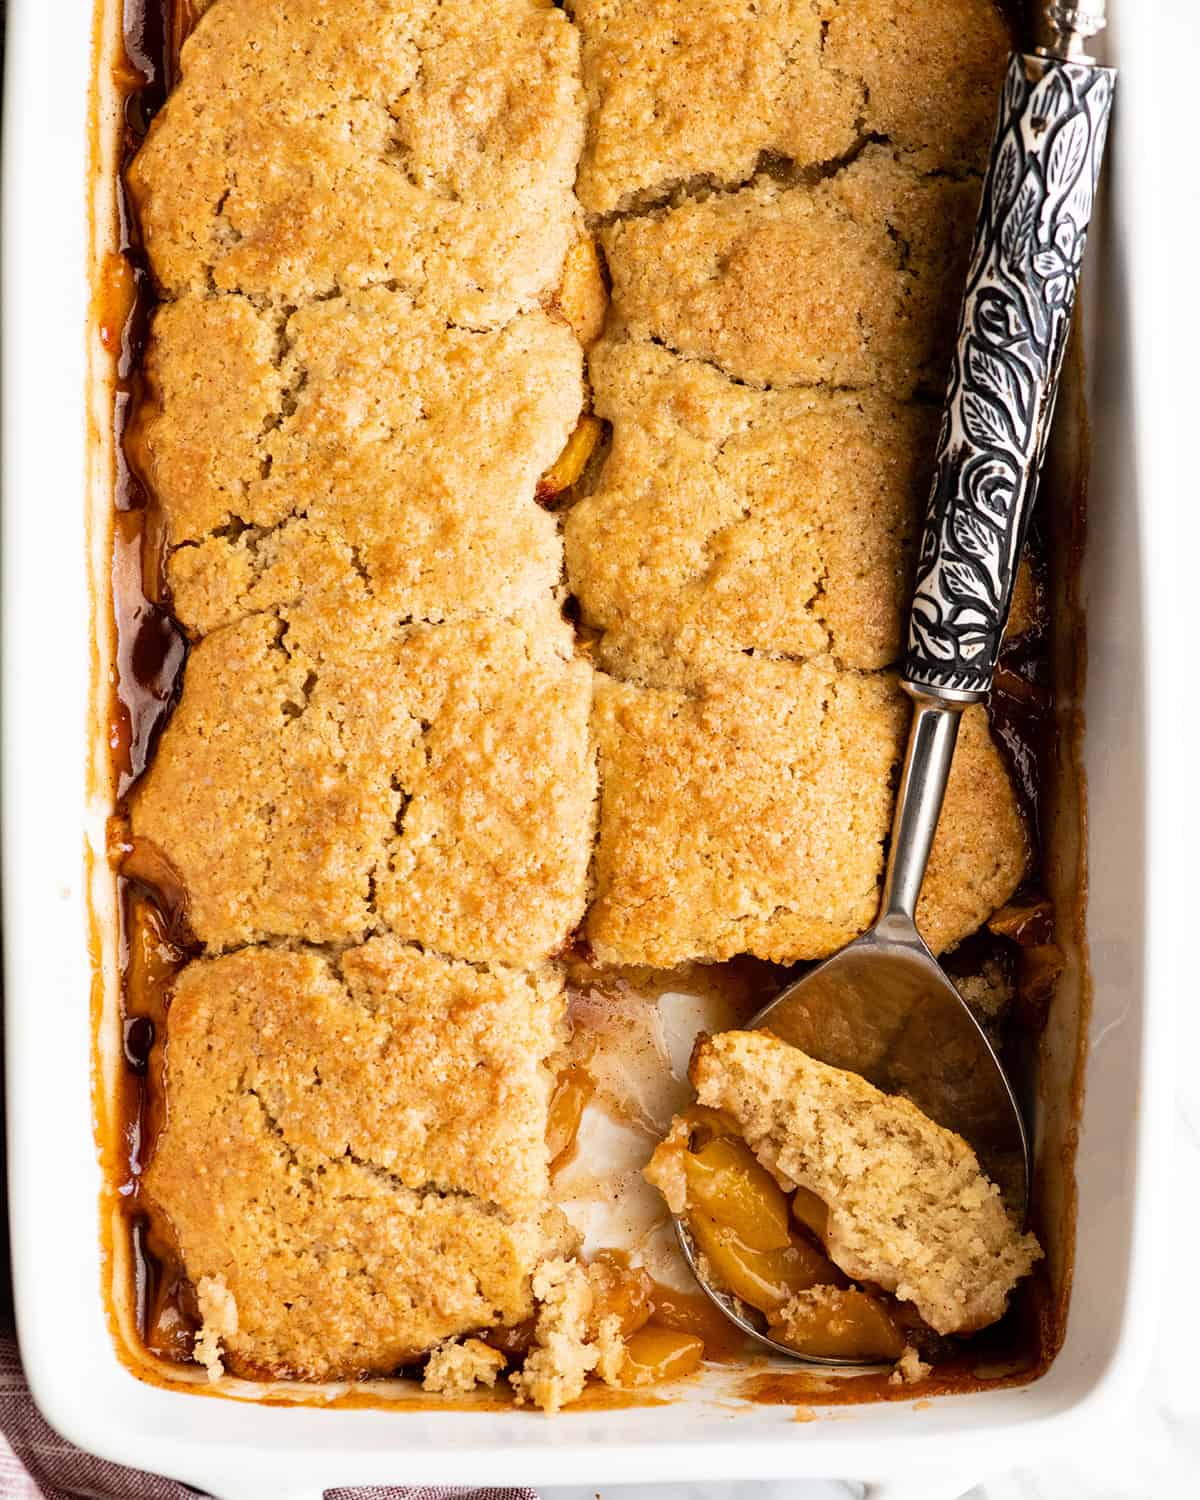 peach cobbler in a baking dish with a serving spoon